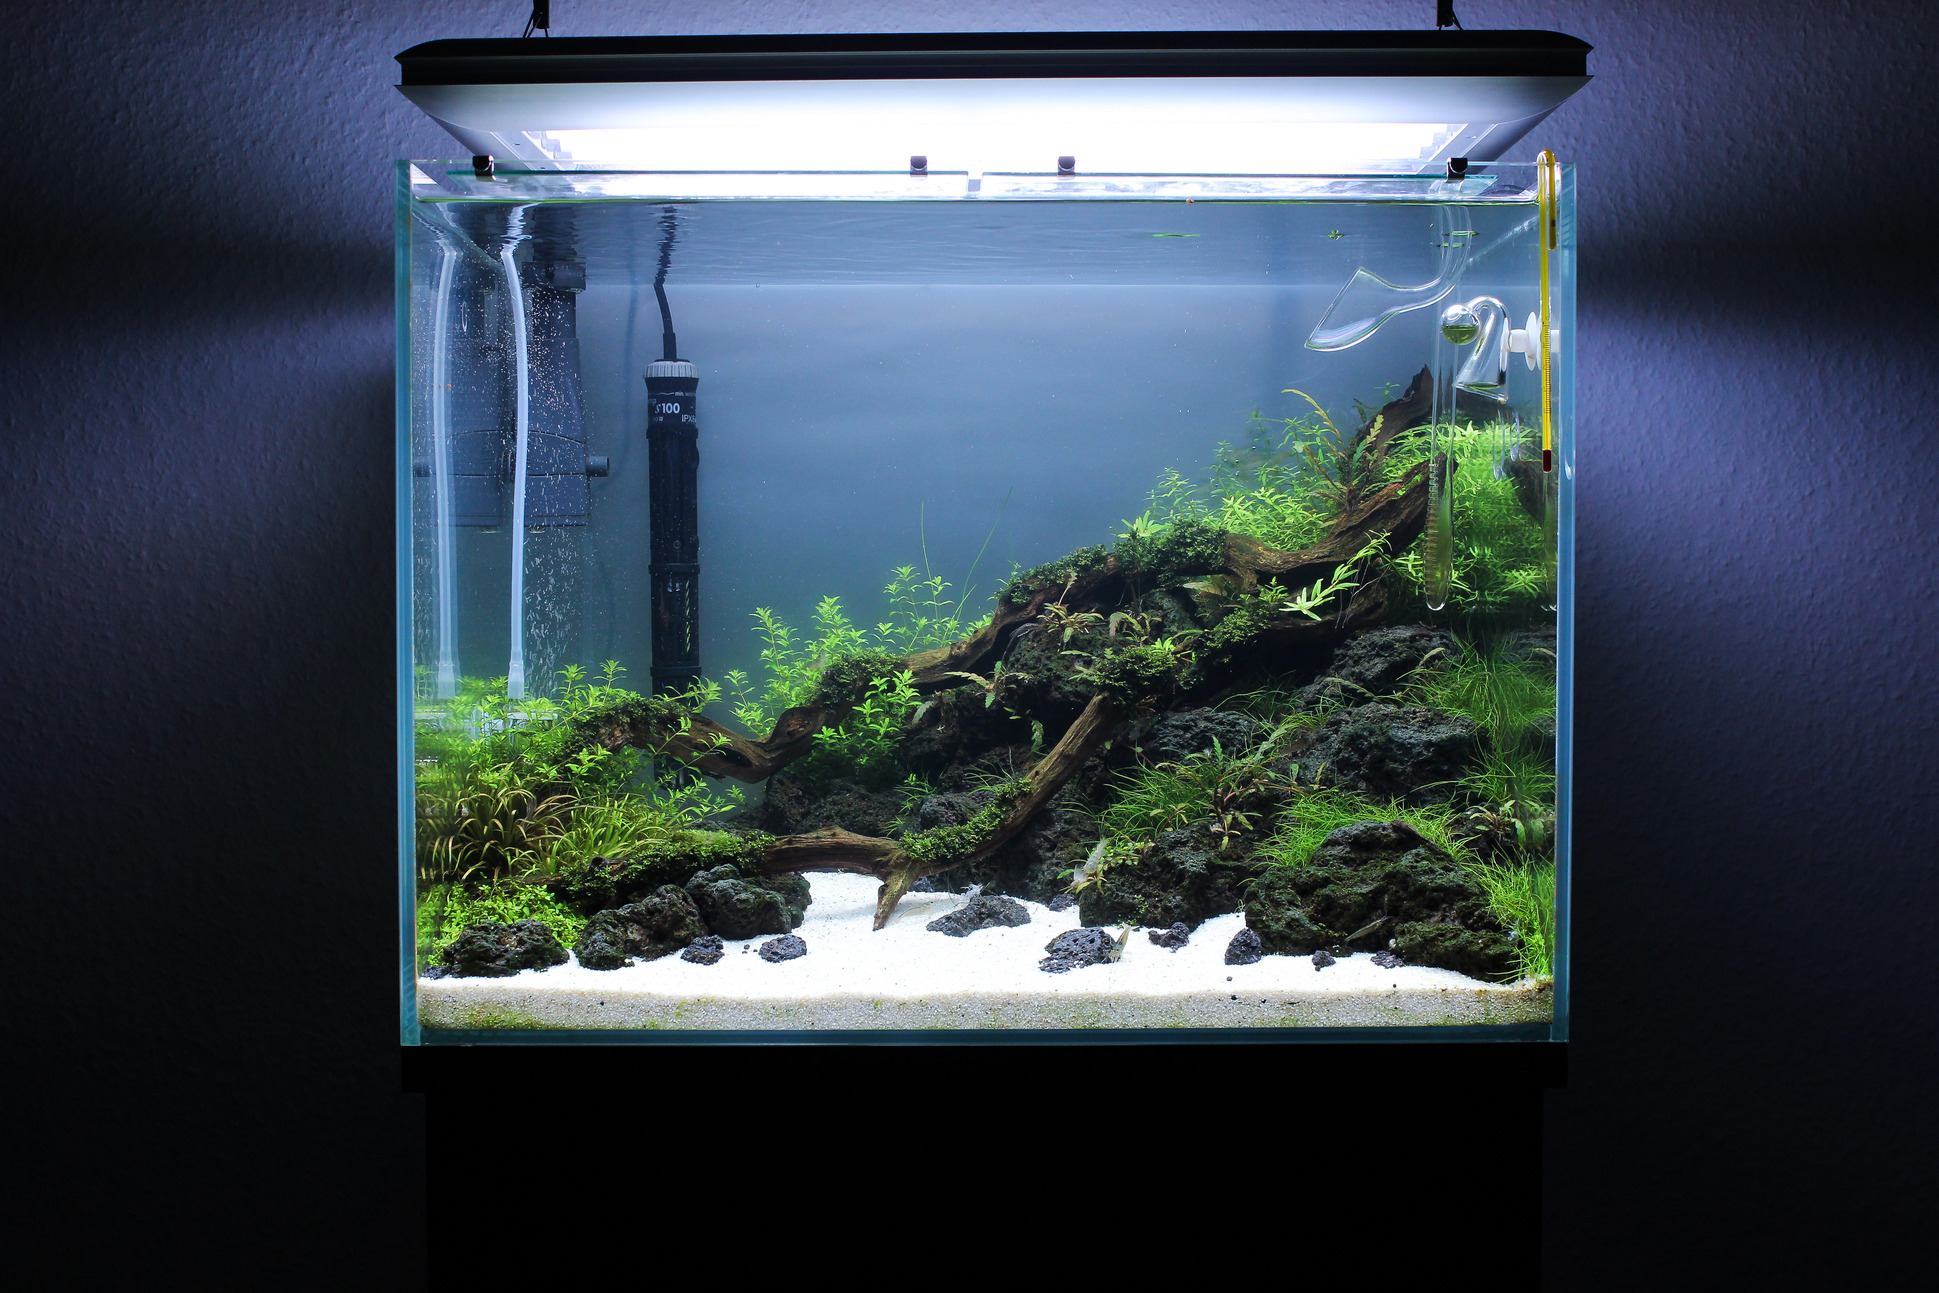 The world’s best aquascapers use JBL products